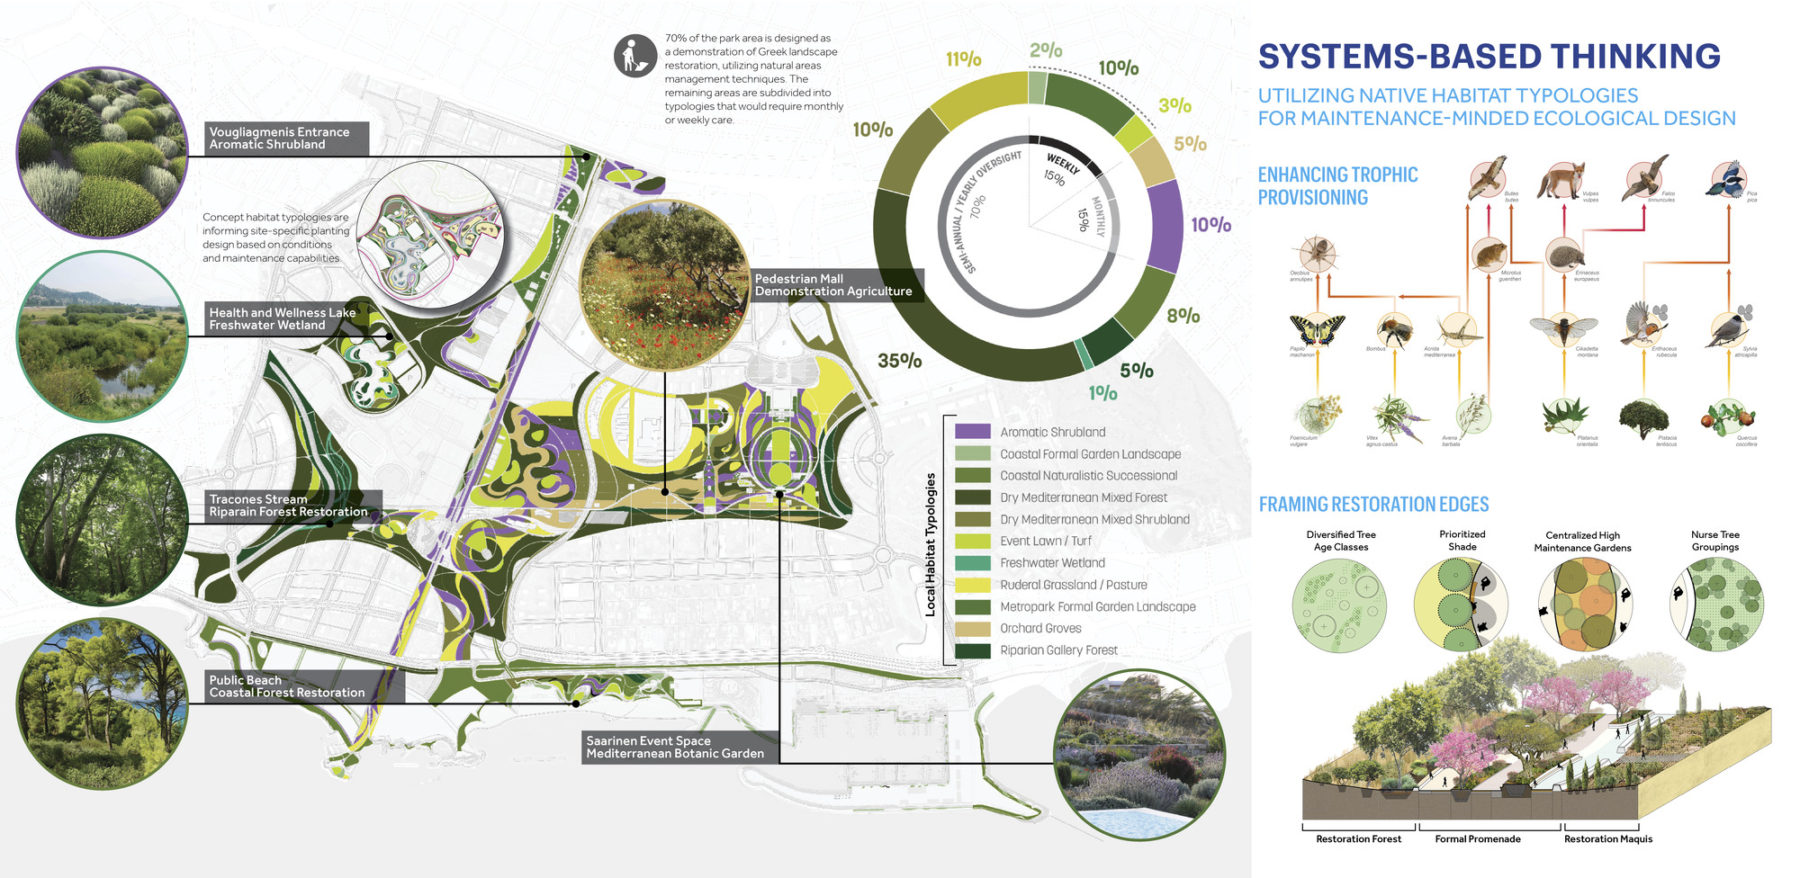 Diagram of the overall ecology strategy for the project. Image title reads 